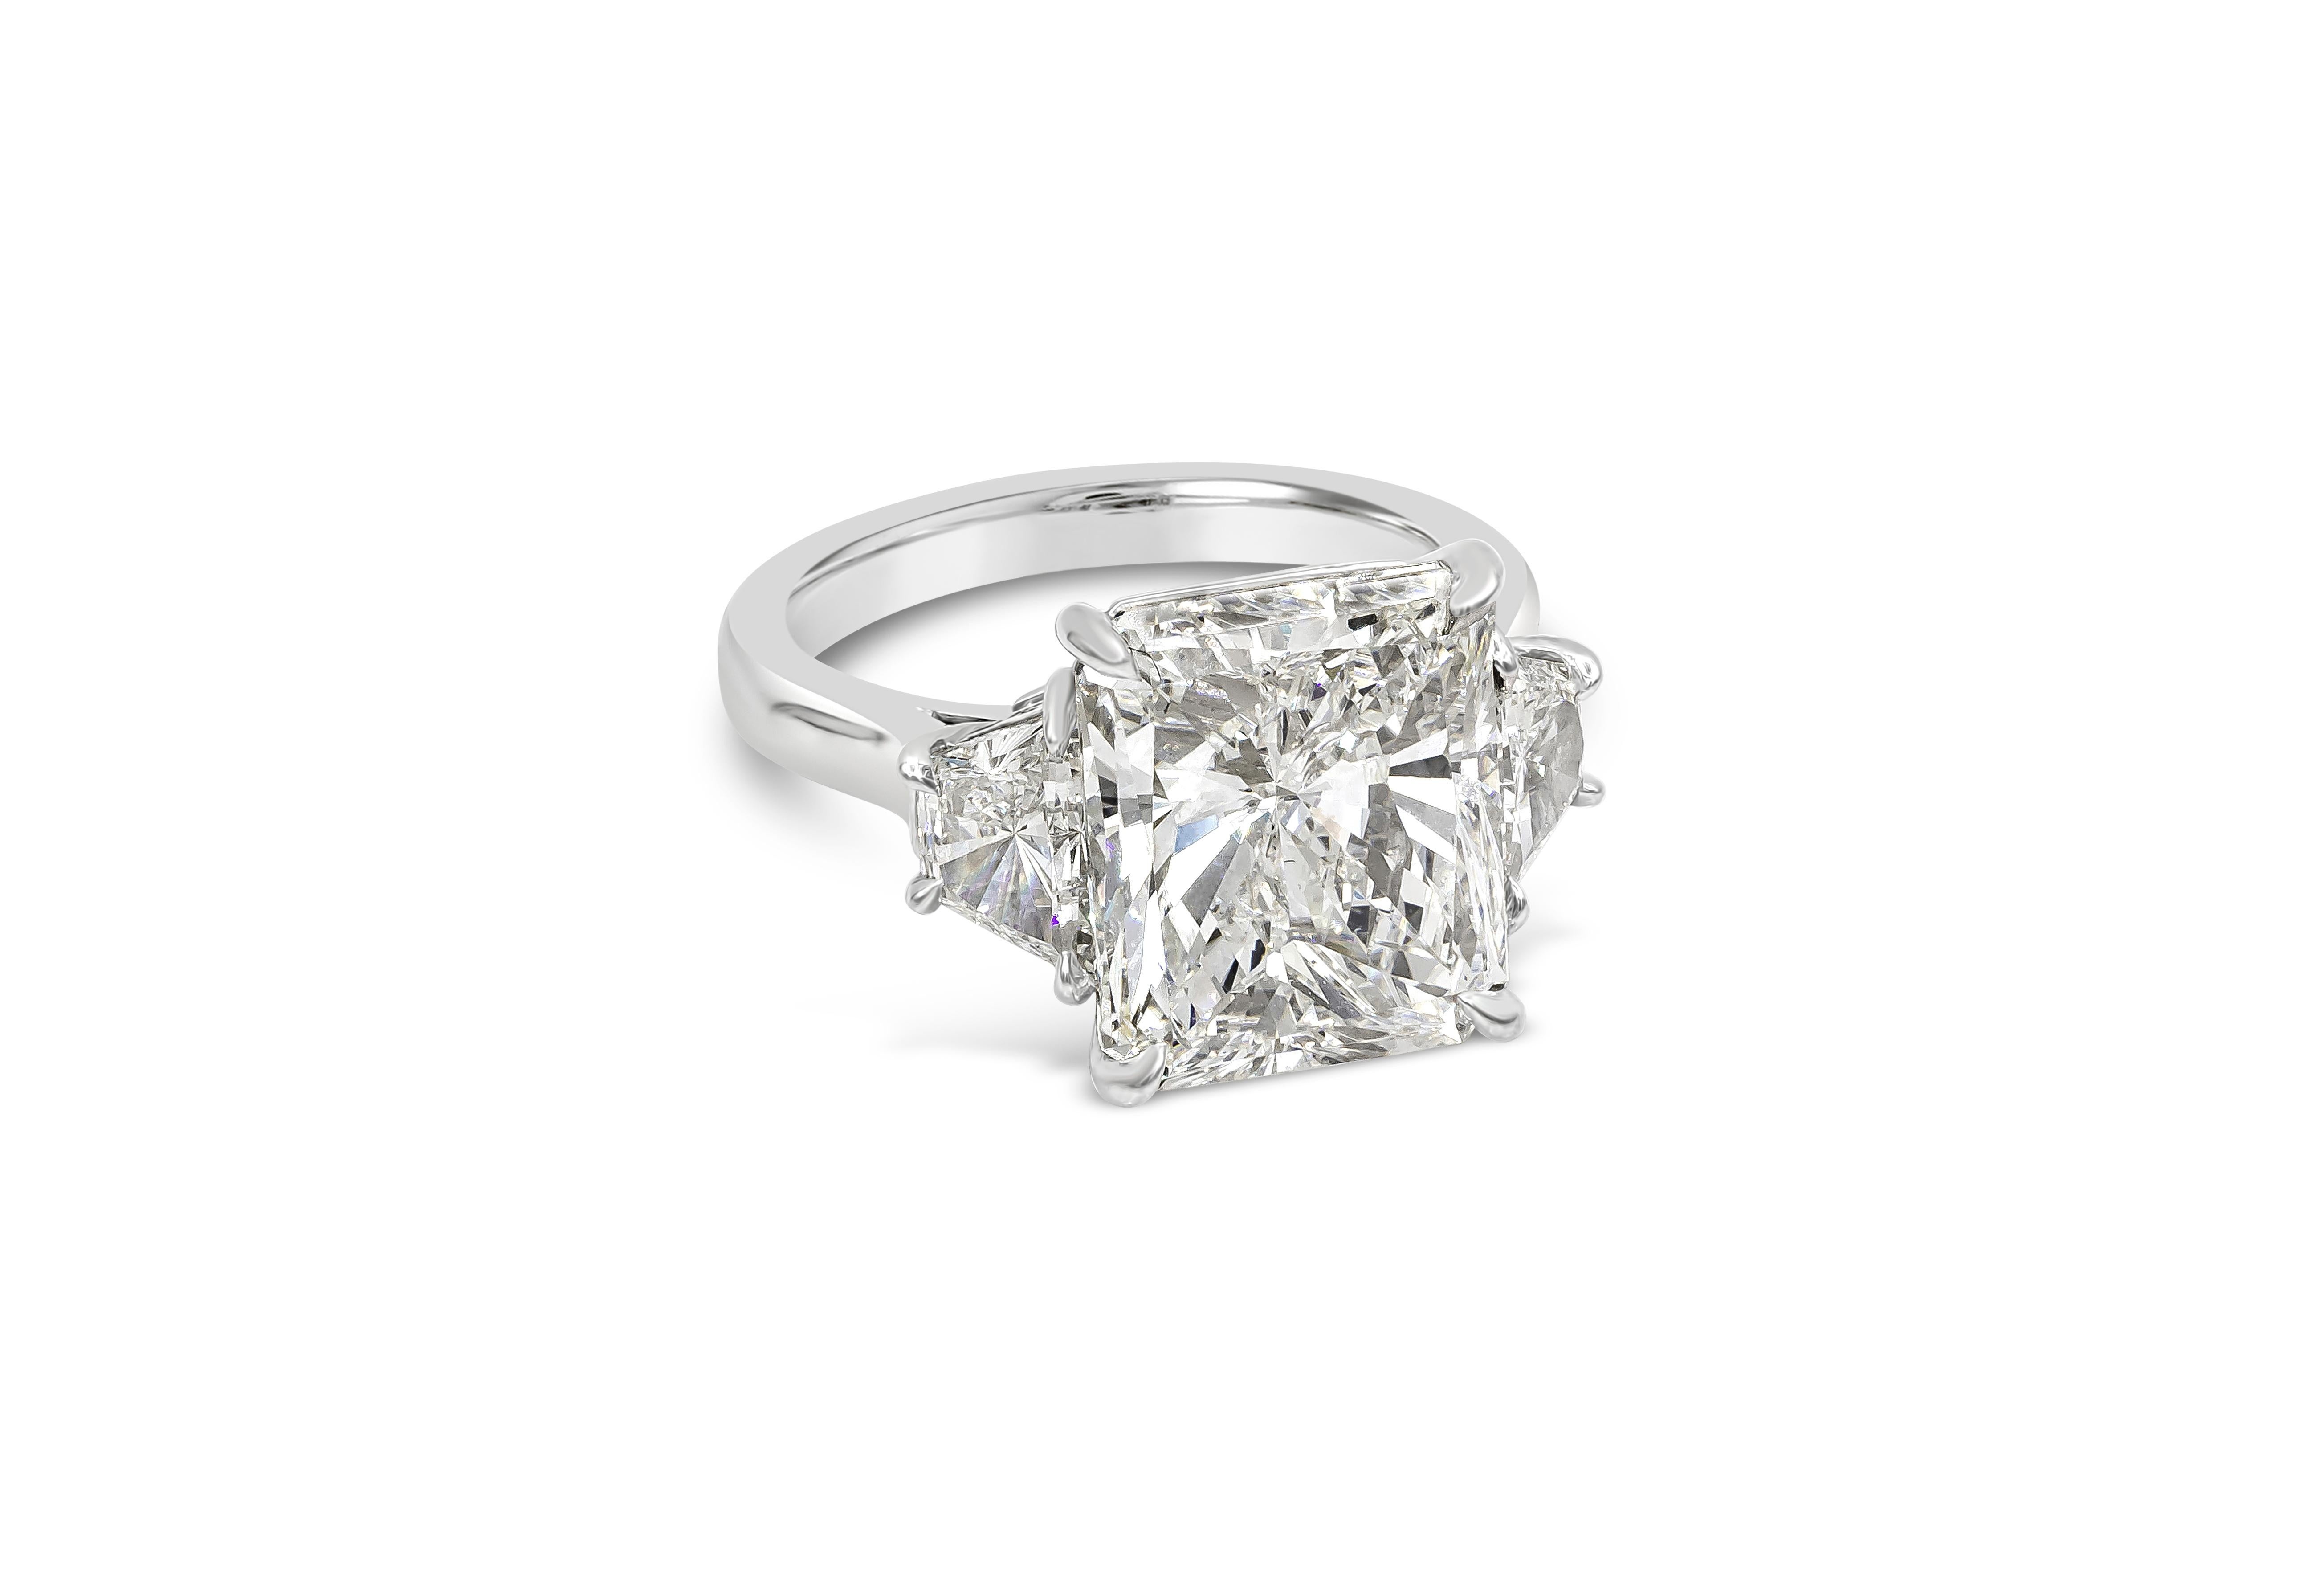 A classic three-stone engagement ring style perfect for anyone. Showcases a 7.03 carat brilliant radiant cut diamond certified by GIA as H color, SI1 clarity, accented by brilliant trapezoid diamonds on either side. Accent diamonds weigh 1.28 carats